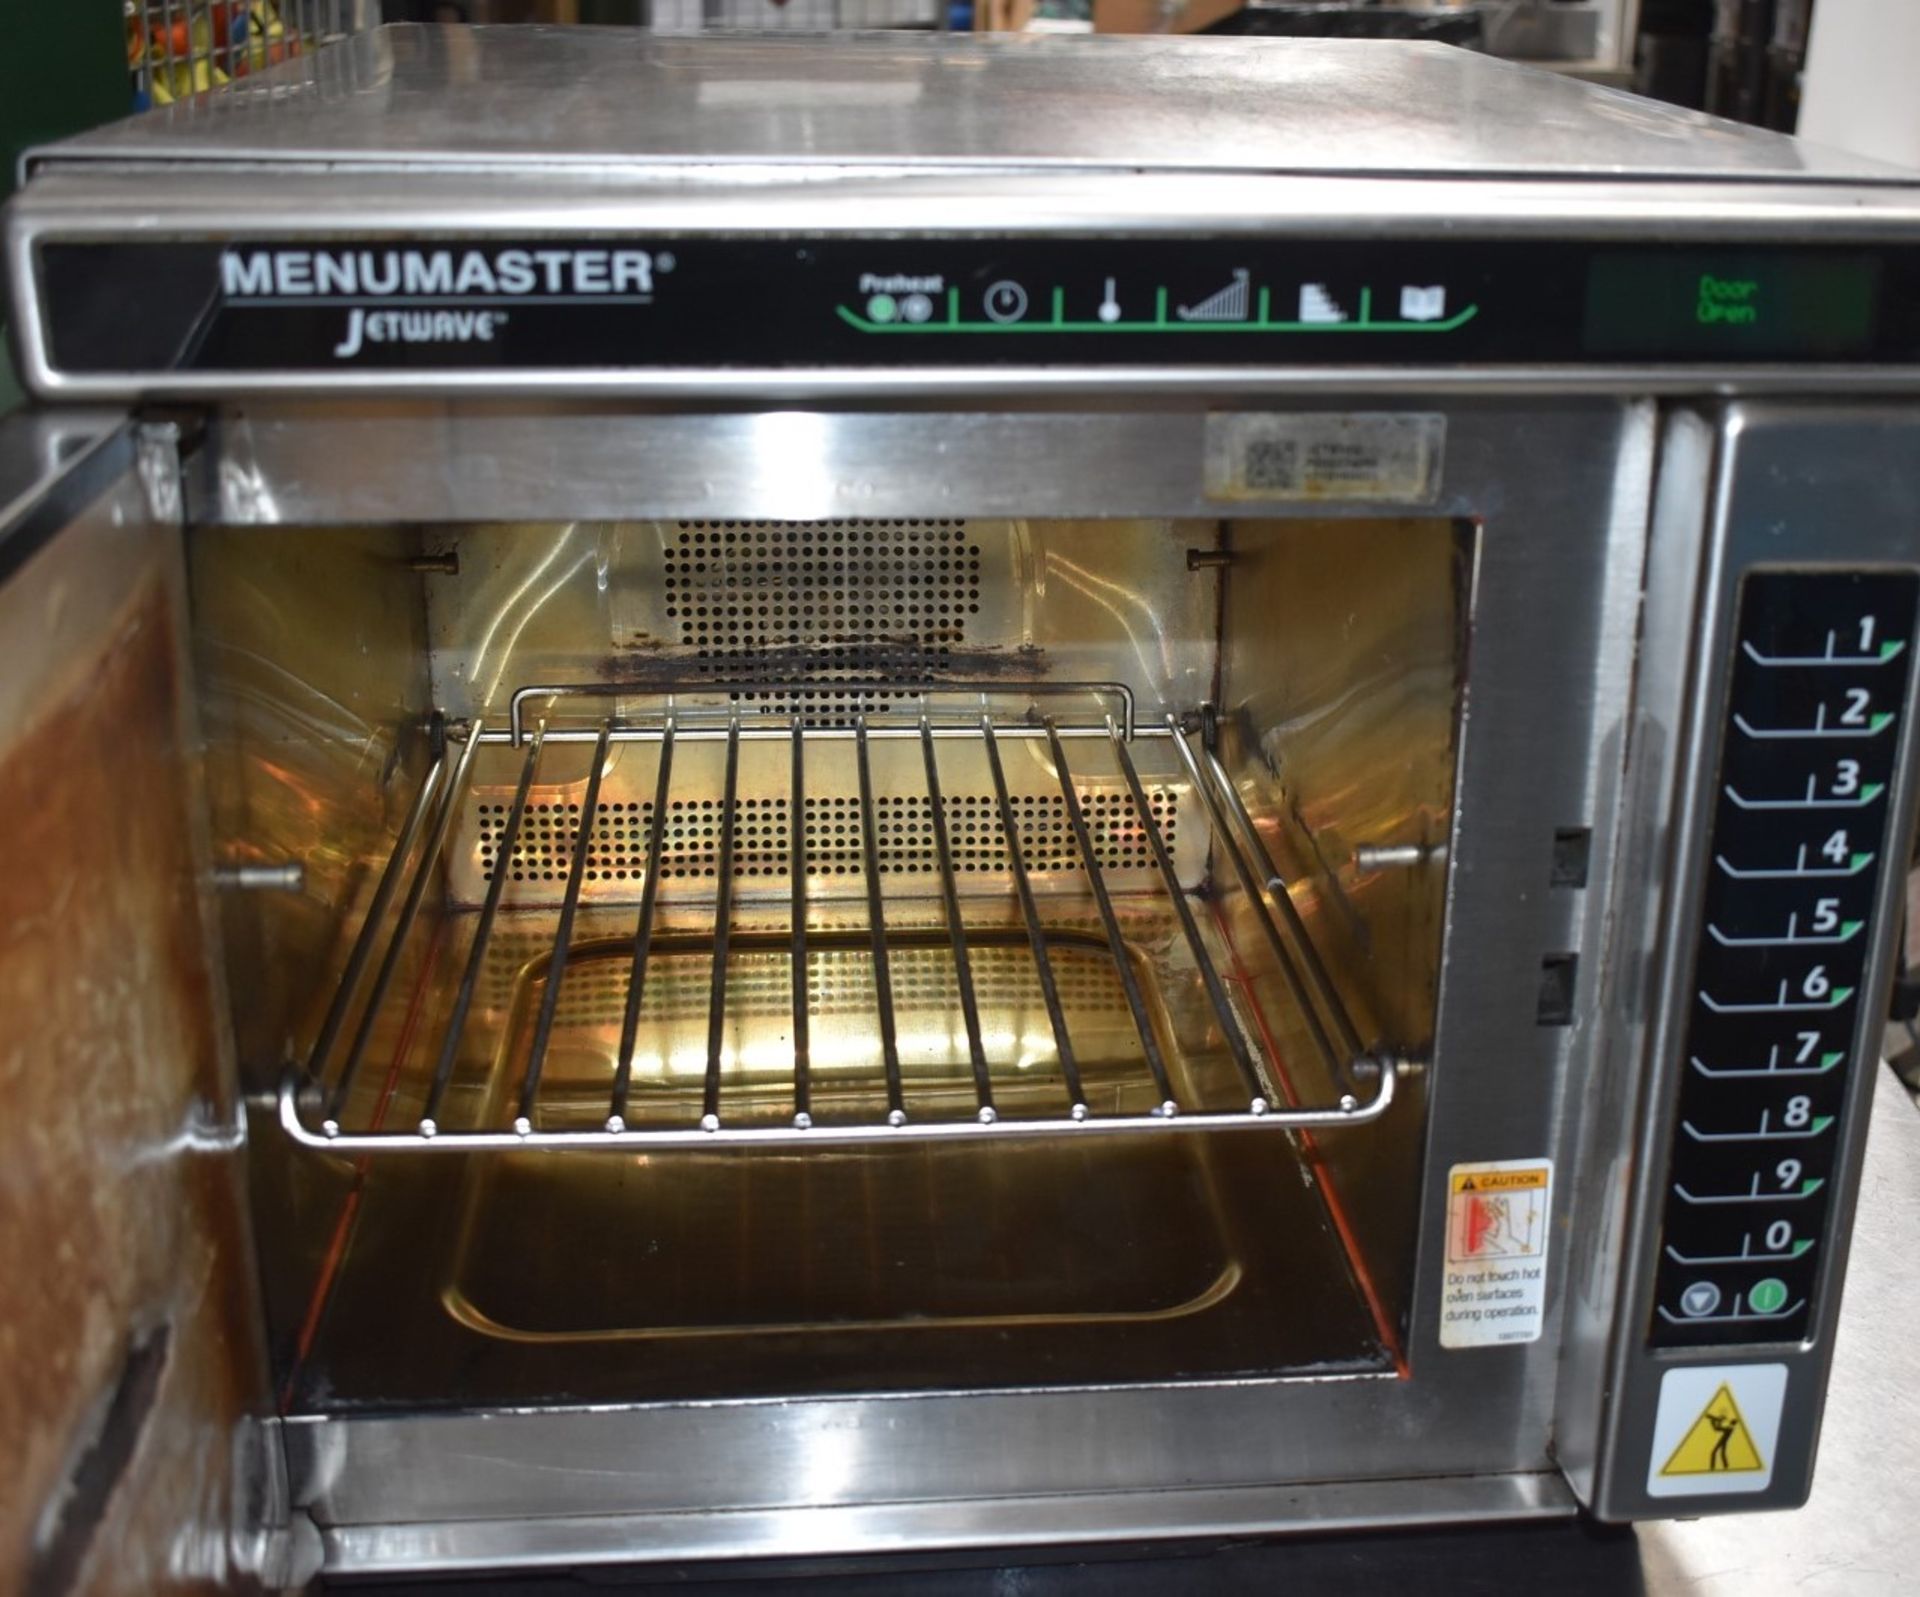 1 x Menumaster Jetwave JET514U High Speed Combination Microwave Oven - RRP £2,400 - Manufacture - Image 8 of 11